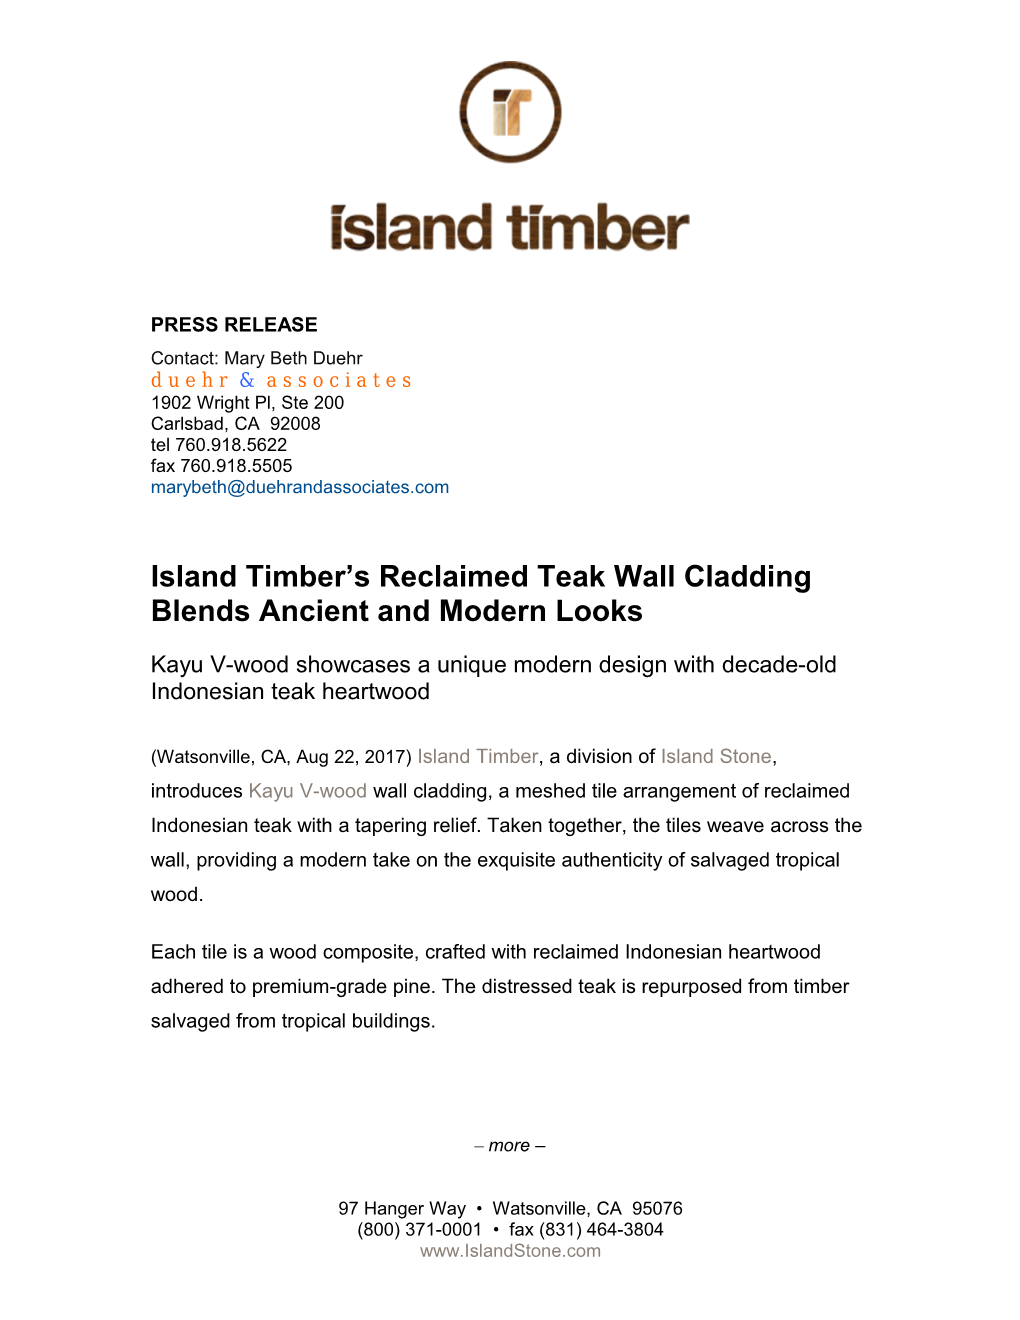 Island Timber S Reclaimed Teak Wall Cladding Blends Ancient and Modern Looks